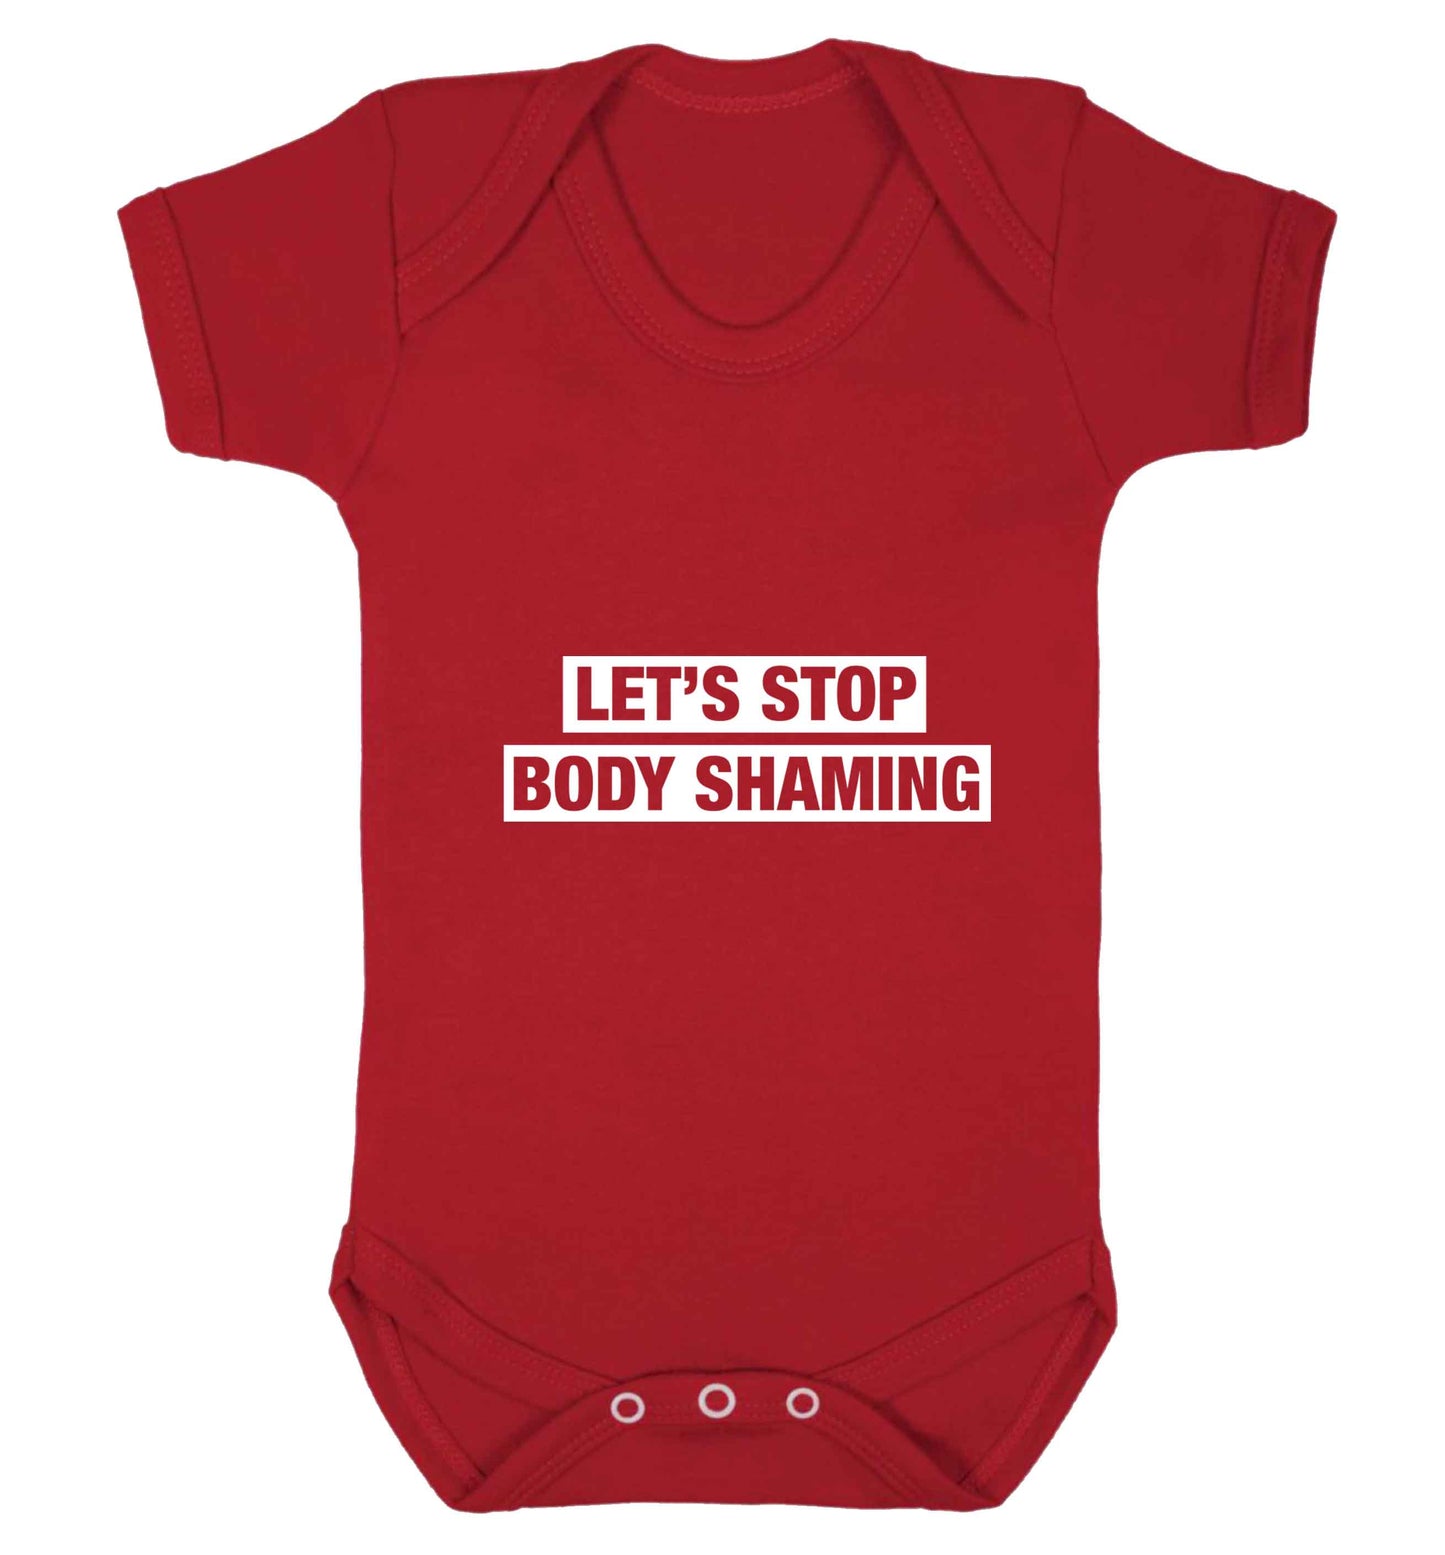 Let's stop body shaming baby vest red 18-24 months